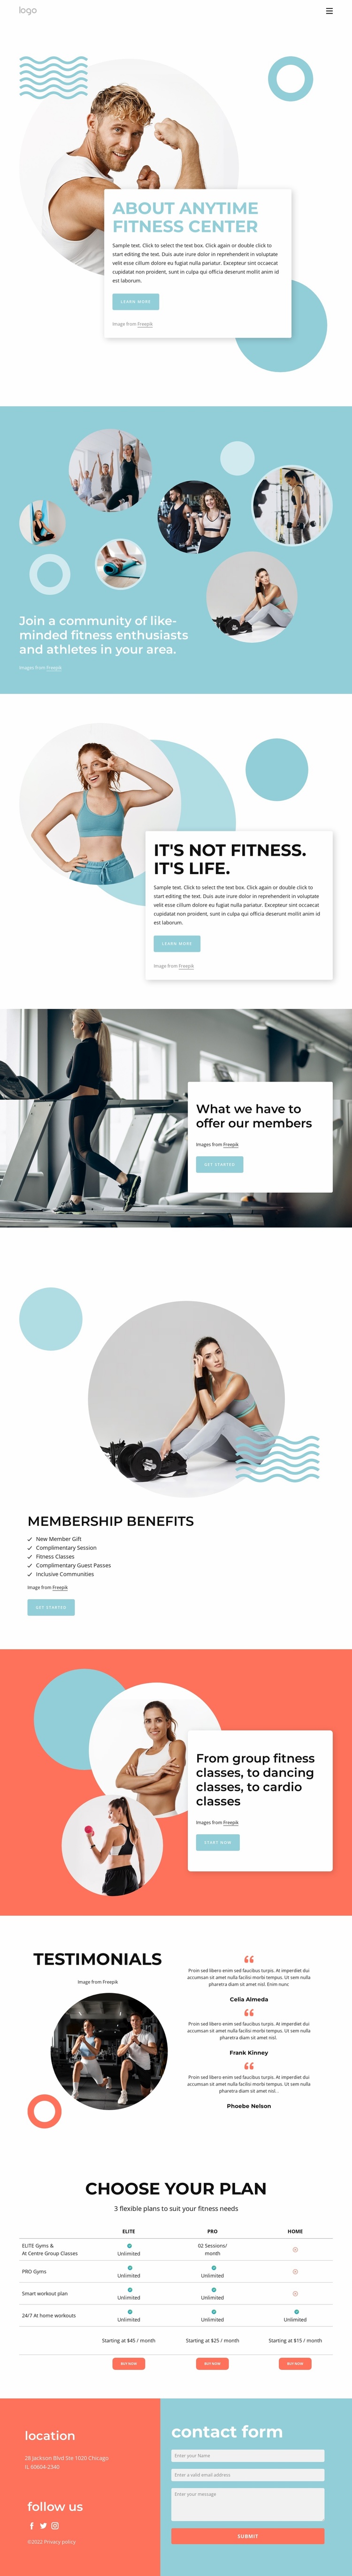 About Anytime fitness center Website Template